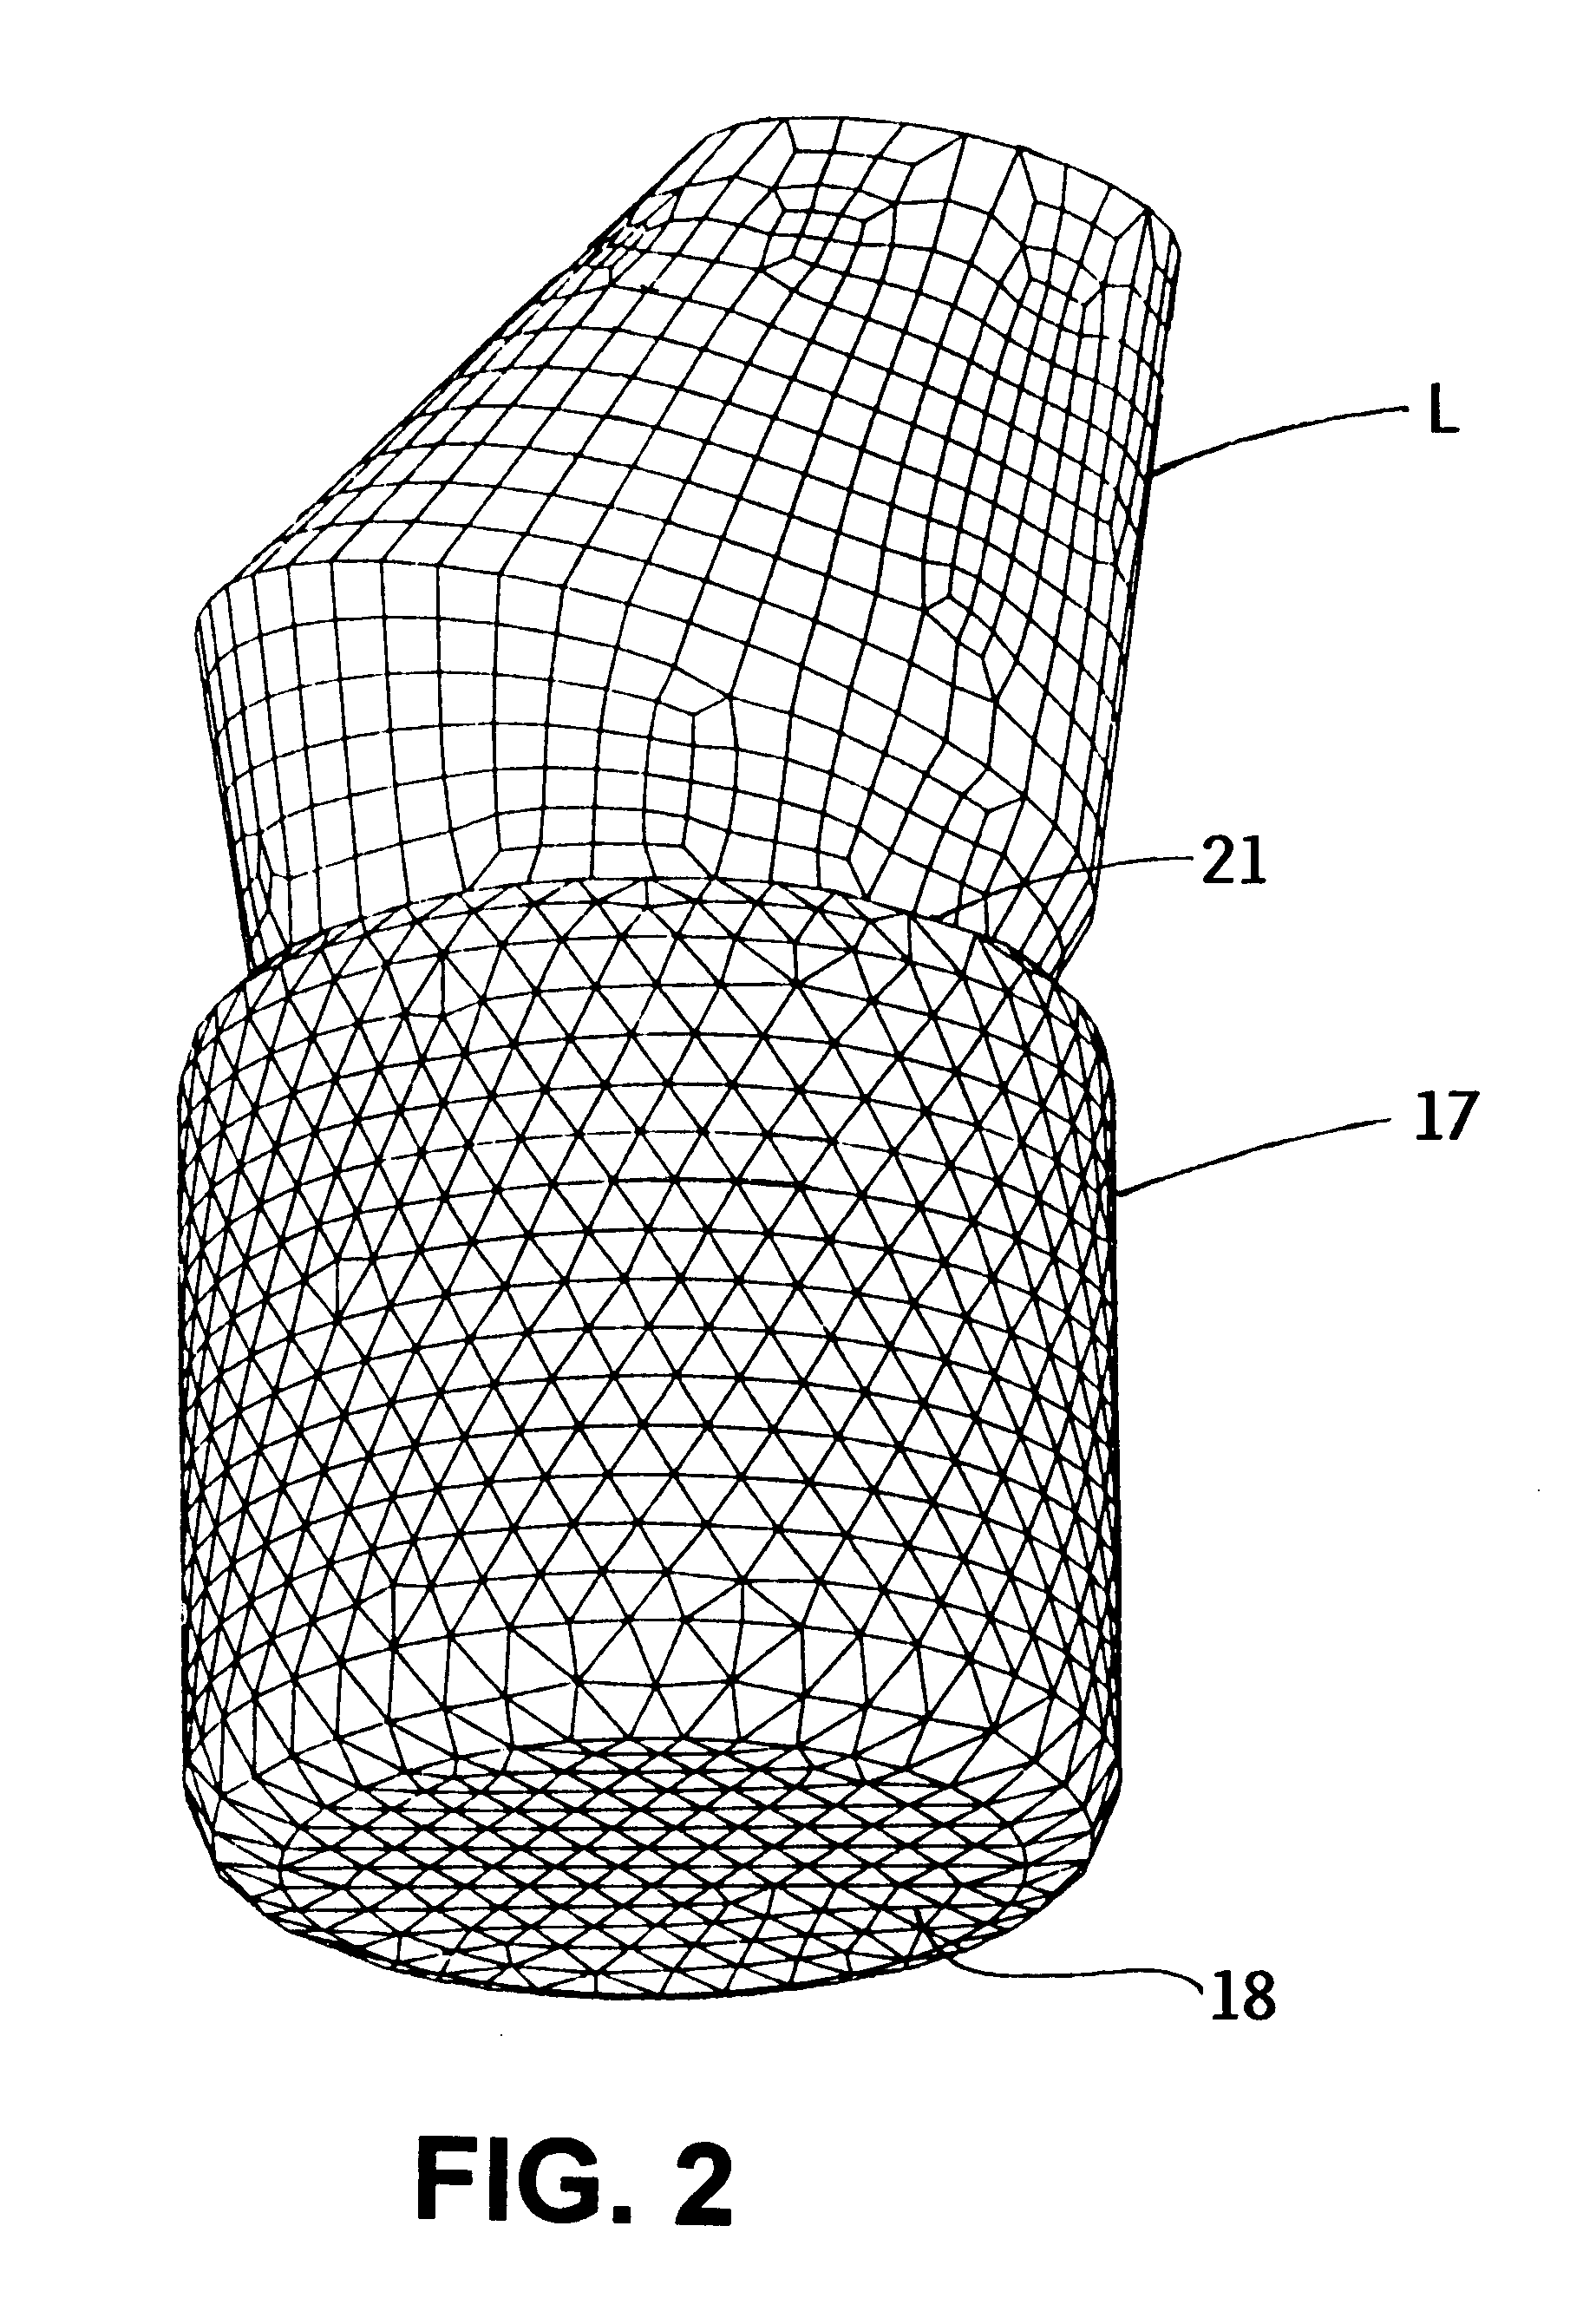 Airbag payload landing system for damping landing impact forces on a flying payload